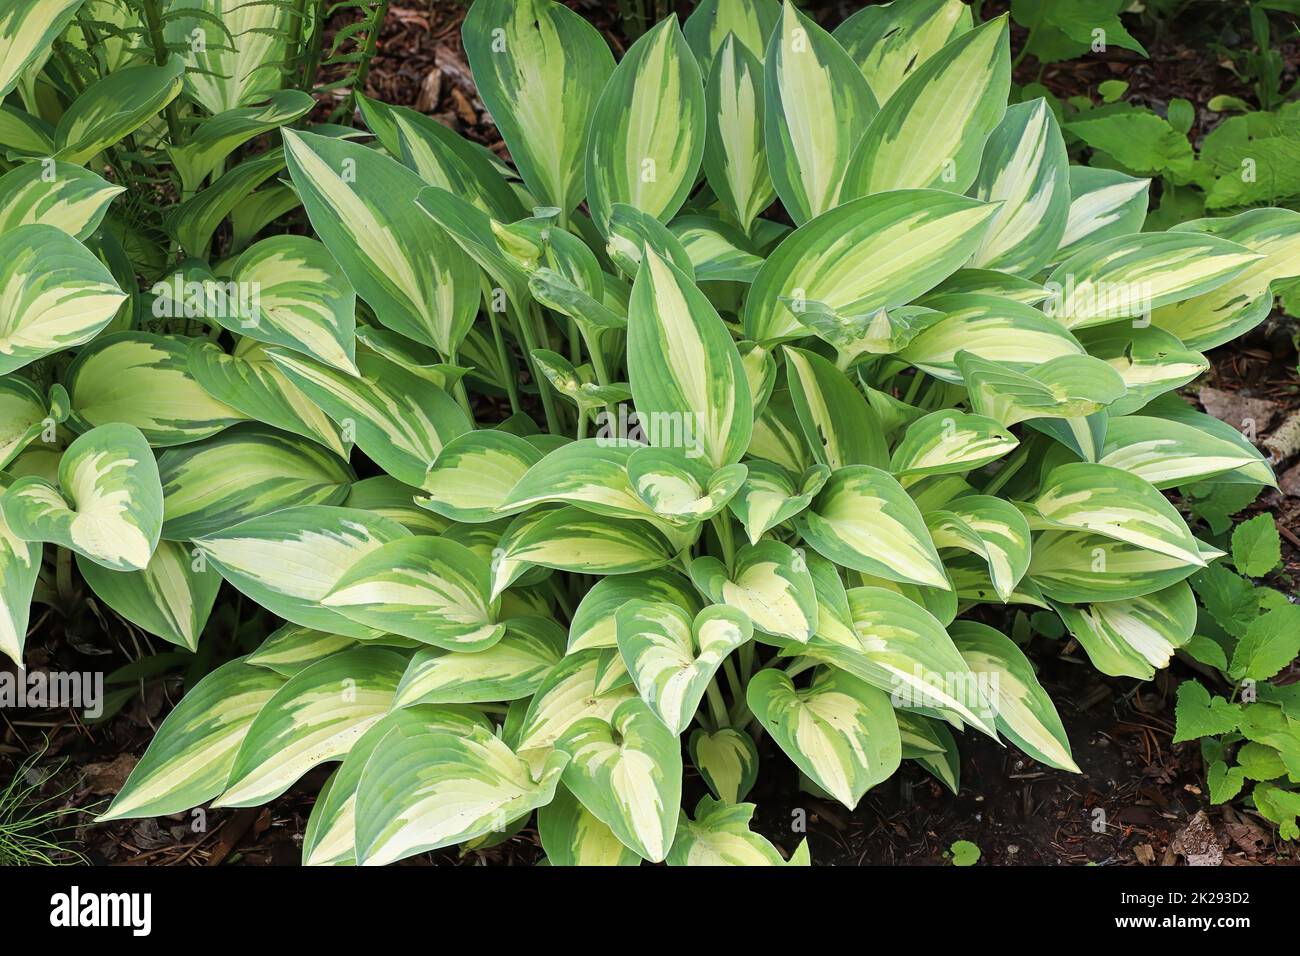 A variegated hosta plant growing in the garden Stock Photo